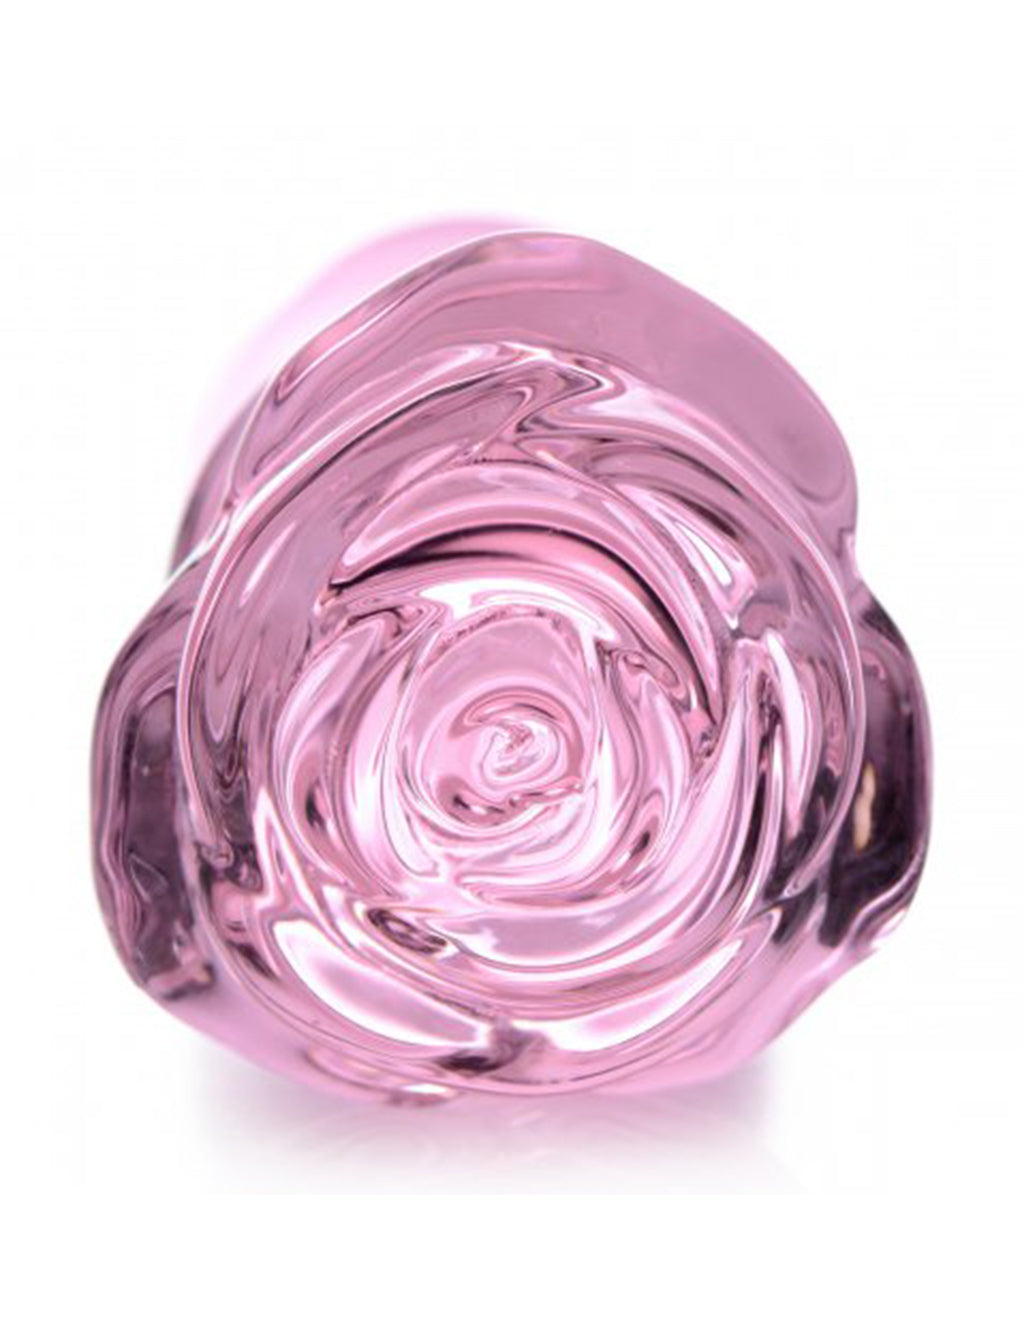 Booty Sparks Pink Rose Glass Plug- Top